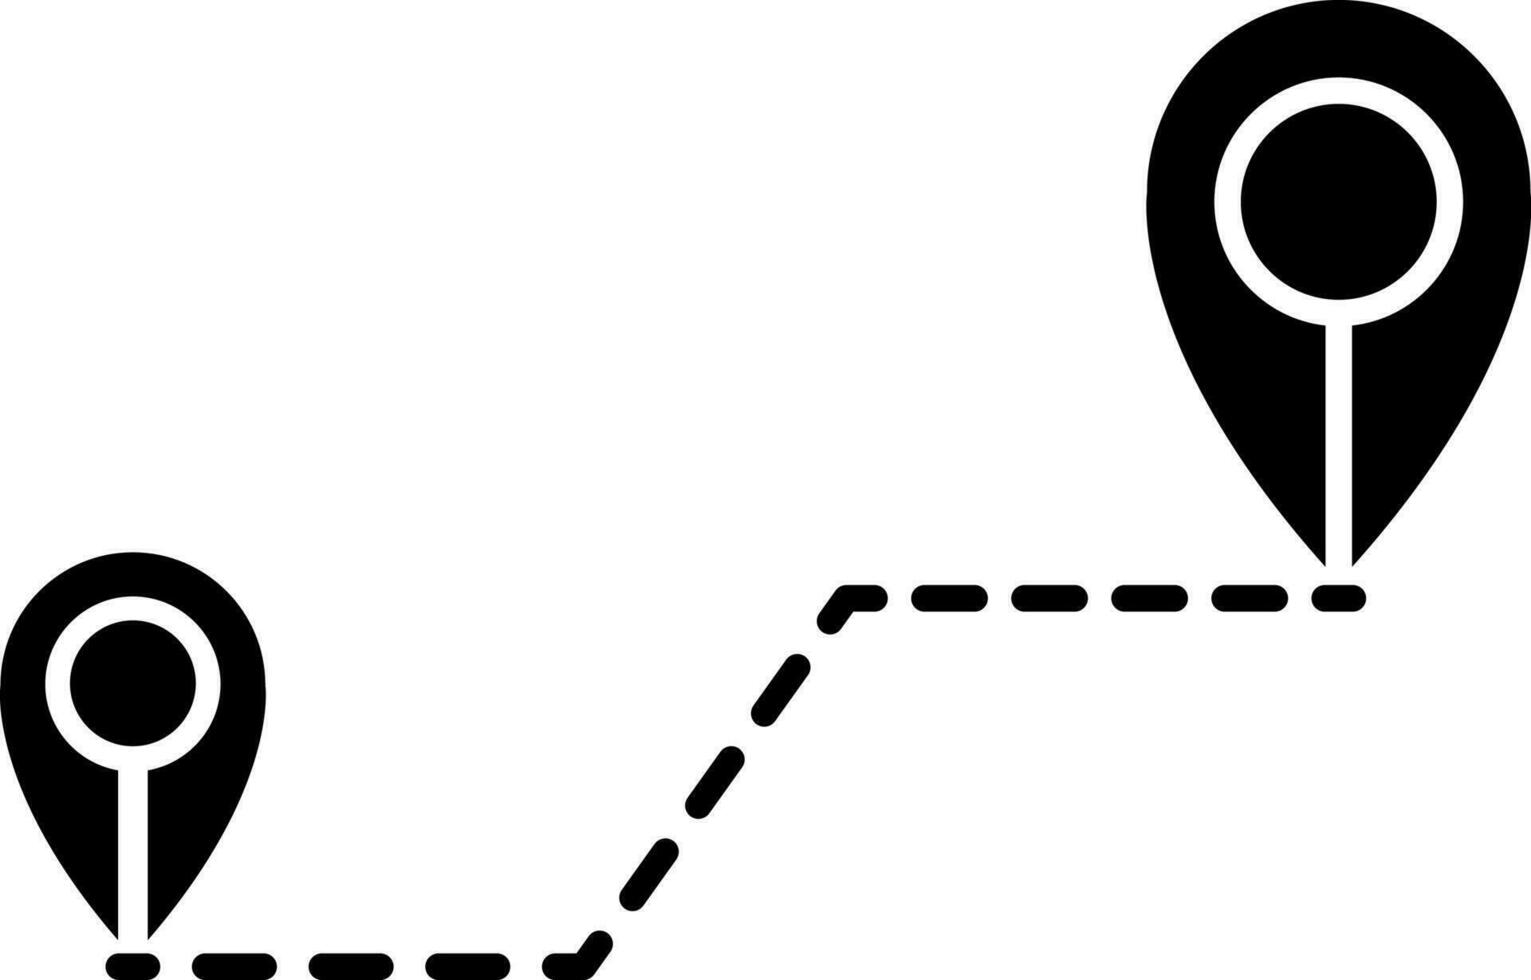 Route or location icon in flat style. vector